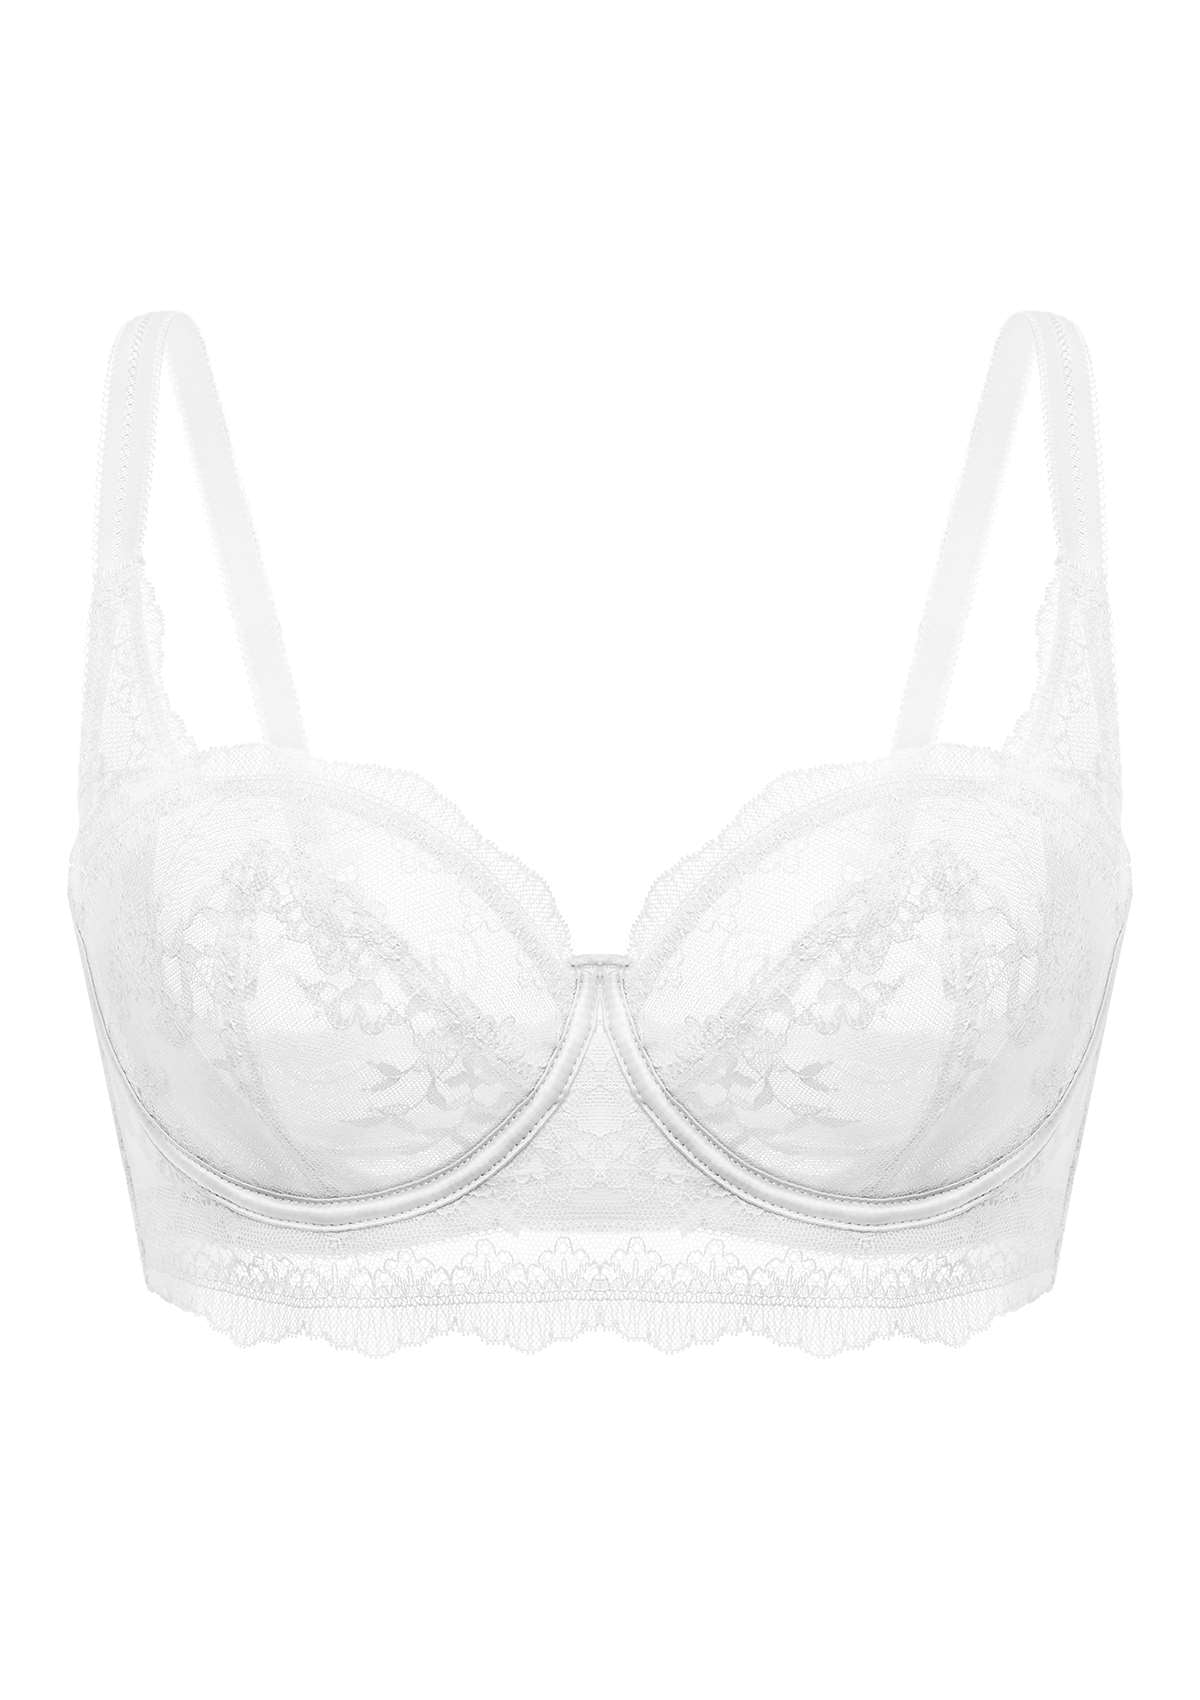 HSIA I Do Floral Lace Bridal Balconette Beautiful Bra For Special Day - Pink / 34 / DDD/F